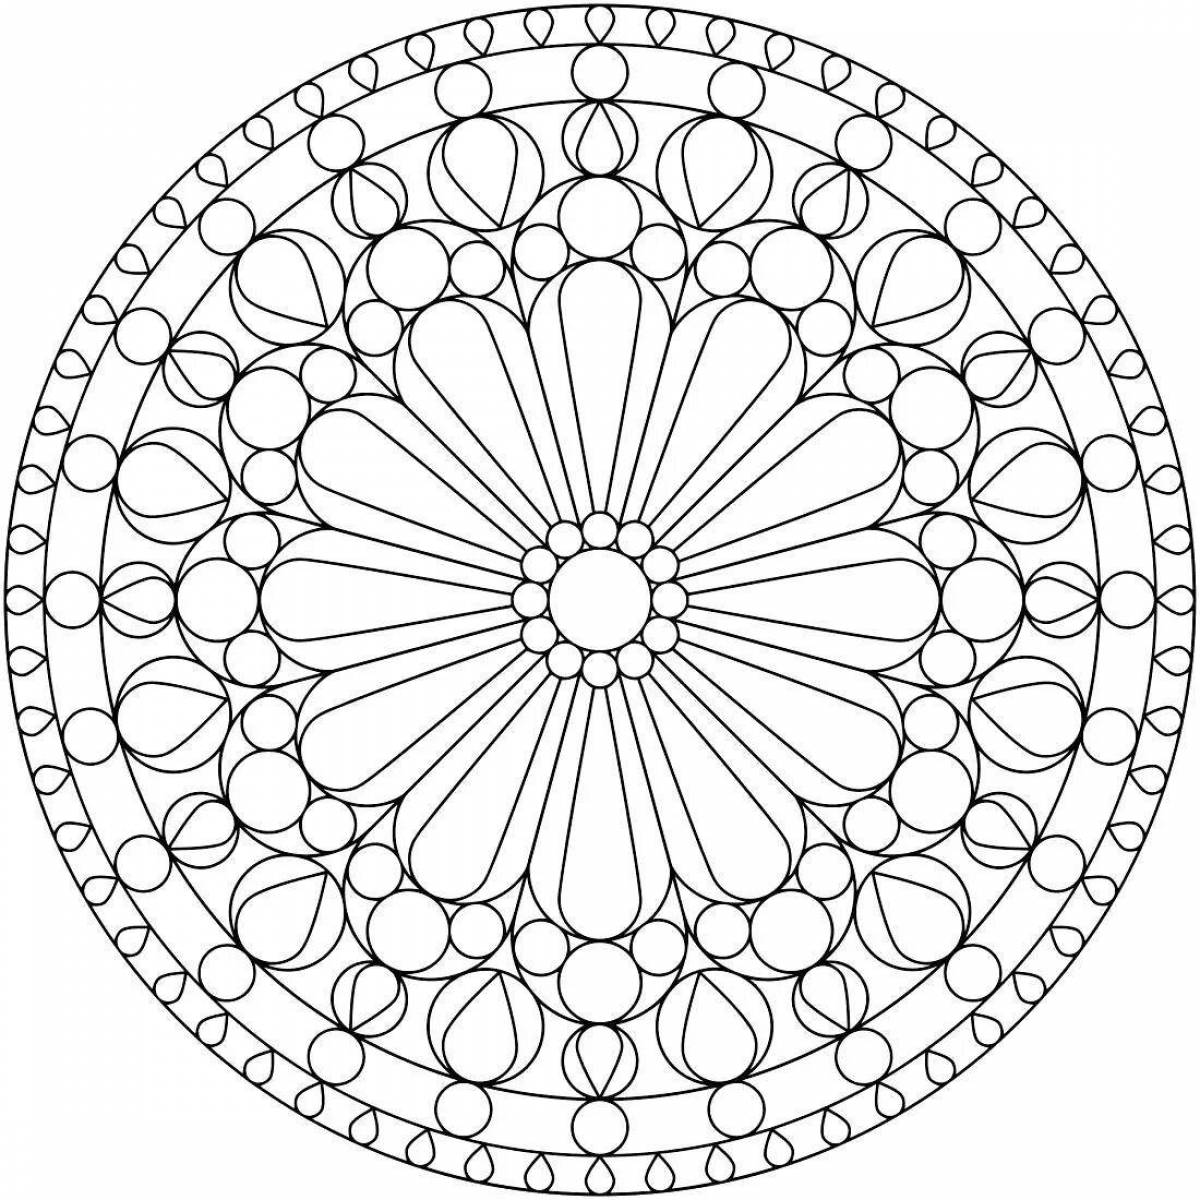 Adorable circle coloring page